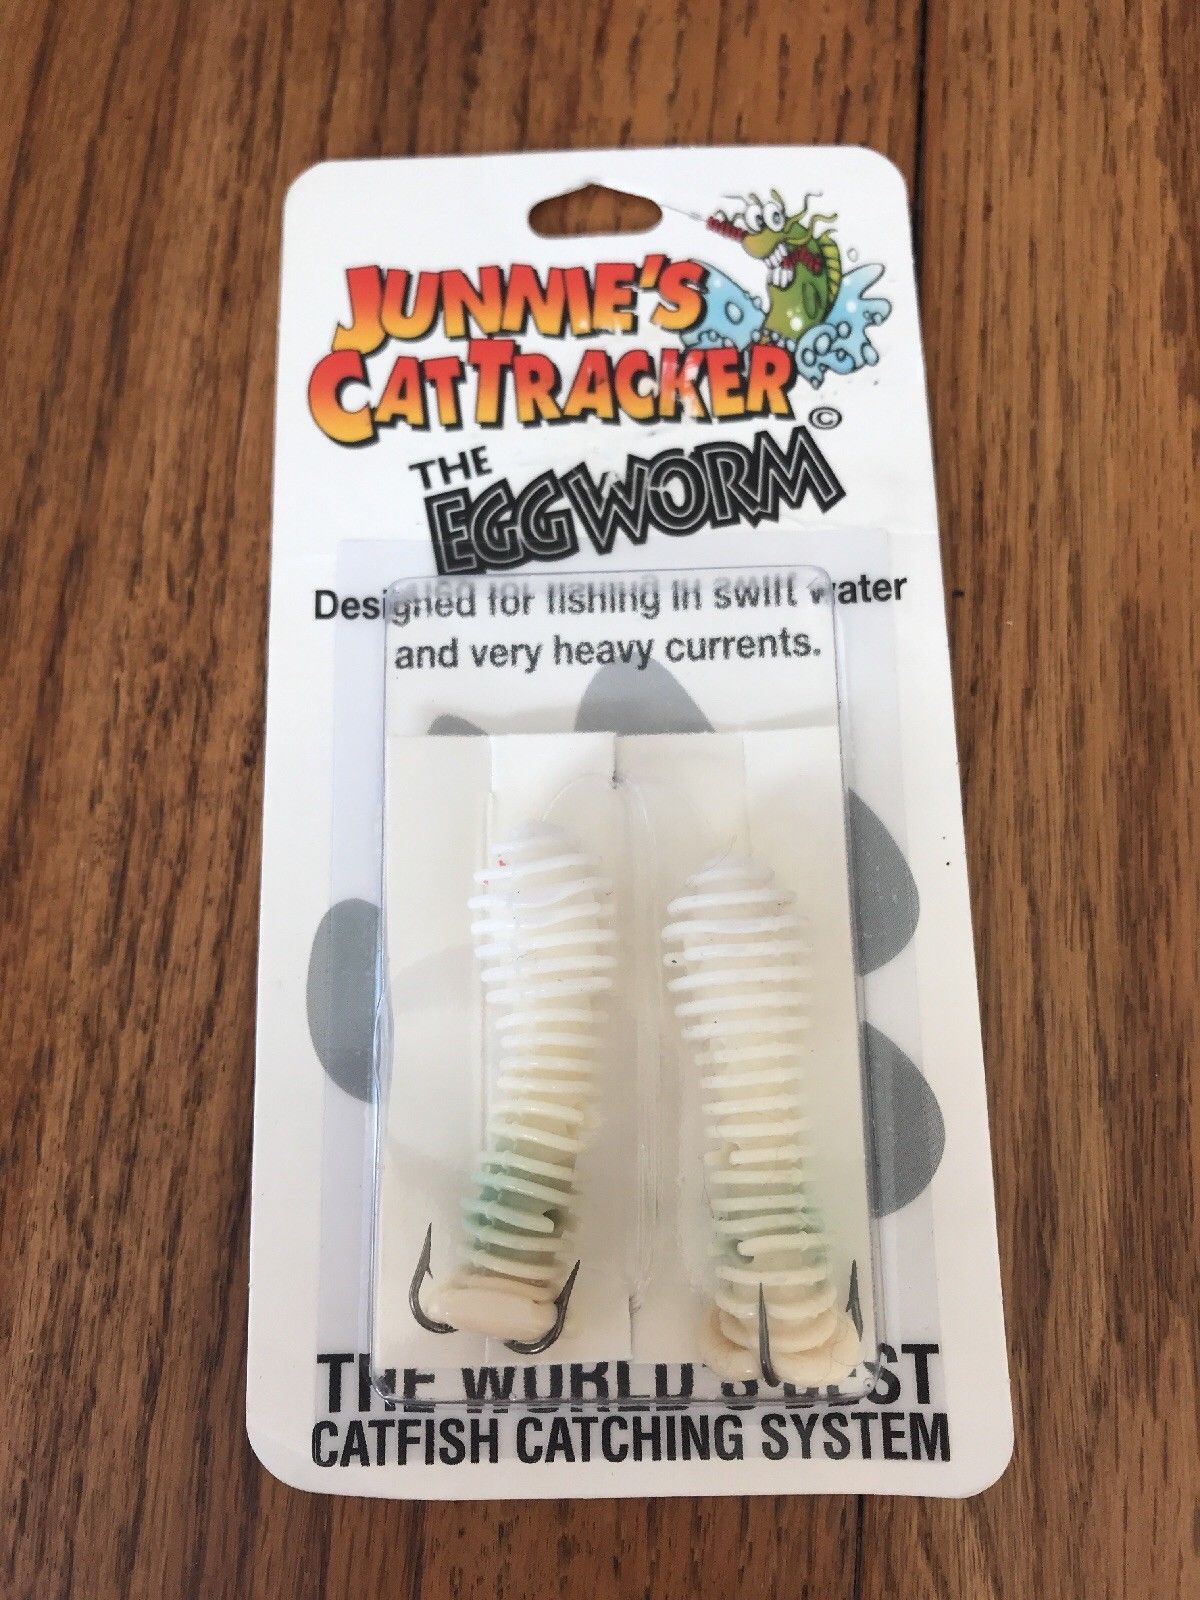 Primary image for Junnie's CatTracker 2" White Eggworm Soft Dipper Baits Fishing Lure